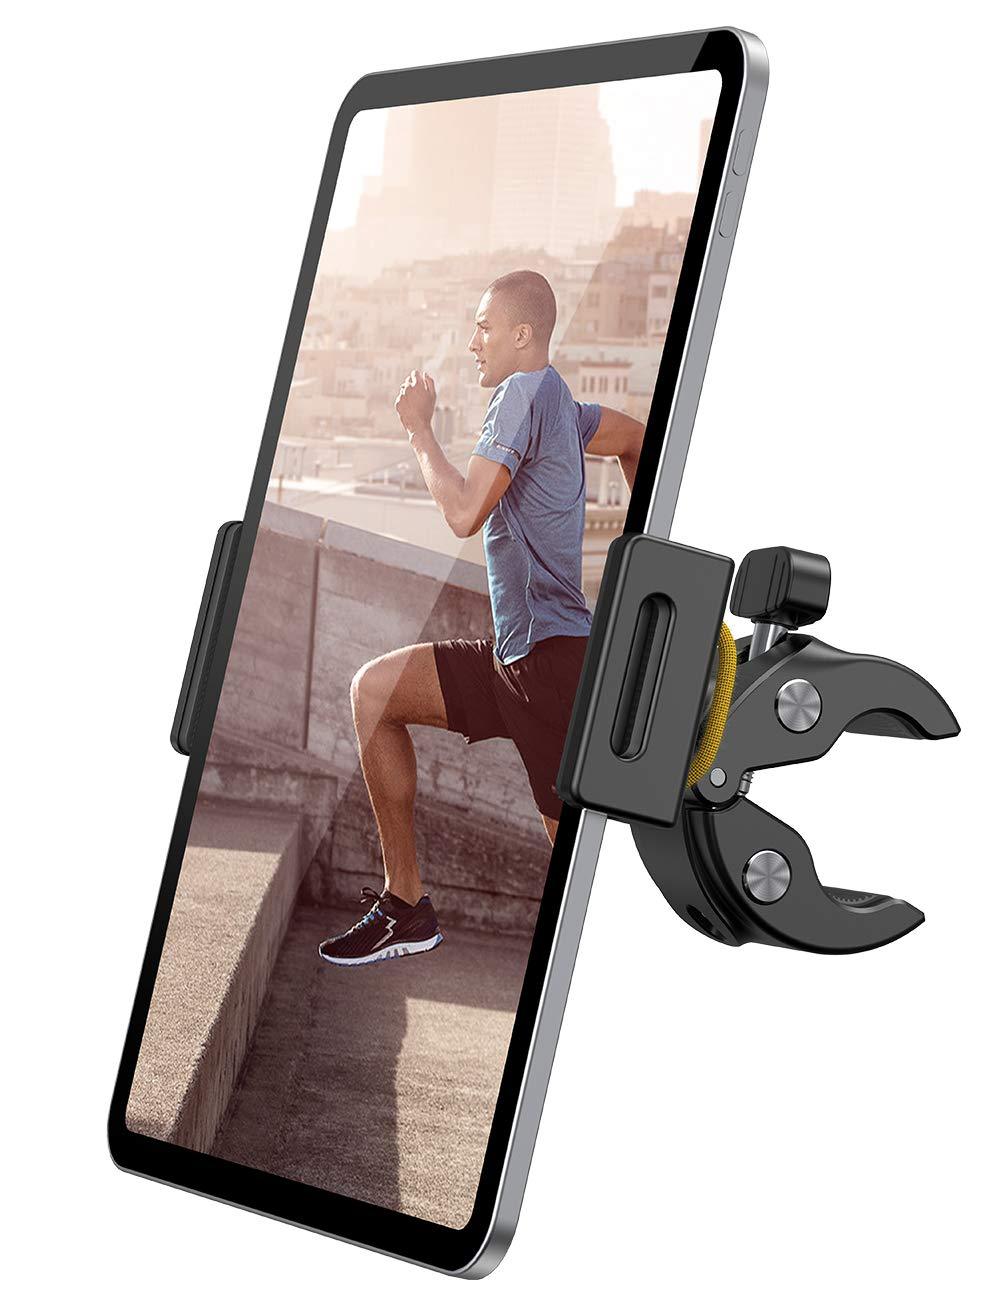  [AUSTRALIA] - Lamicall Indoor Bike Tablet Holder Mount - Gym Treadmill Tablet Stand for Microphone Stand, Indoor Stationary Exercise Bicycle Tablet Clamp for iPad Pro 11 / Air/ Mini, Galaxy, More 4.7-12.9" Tablet Black